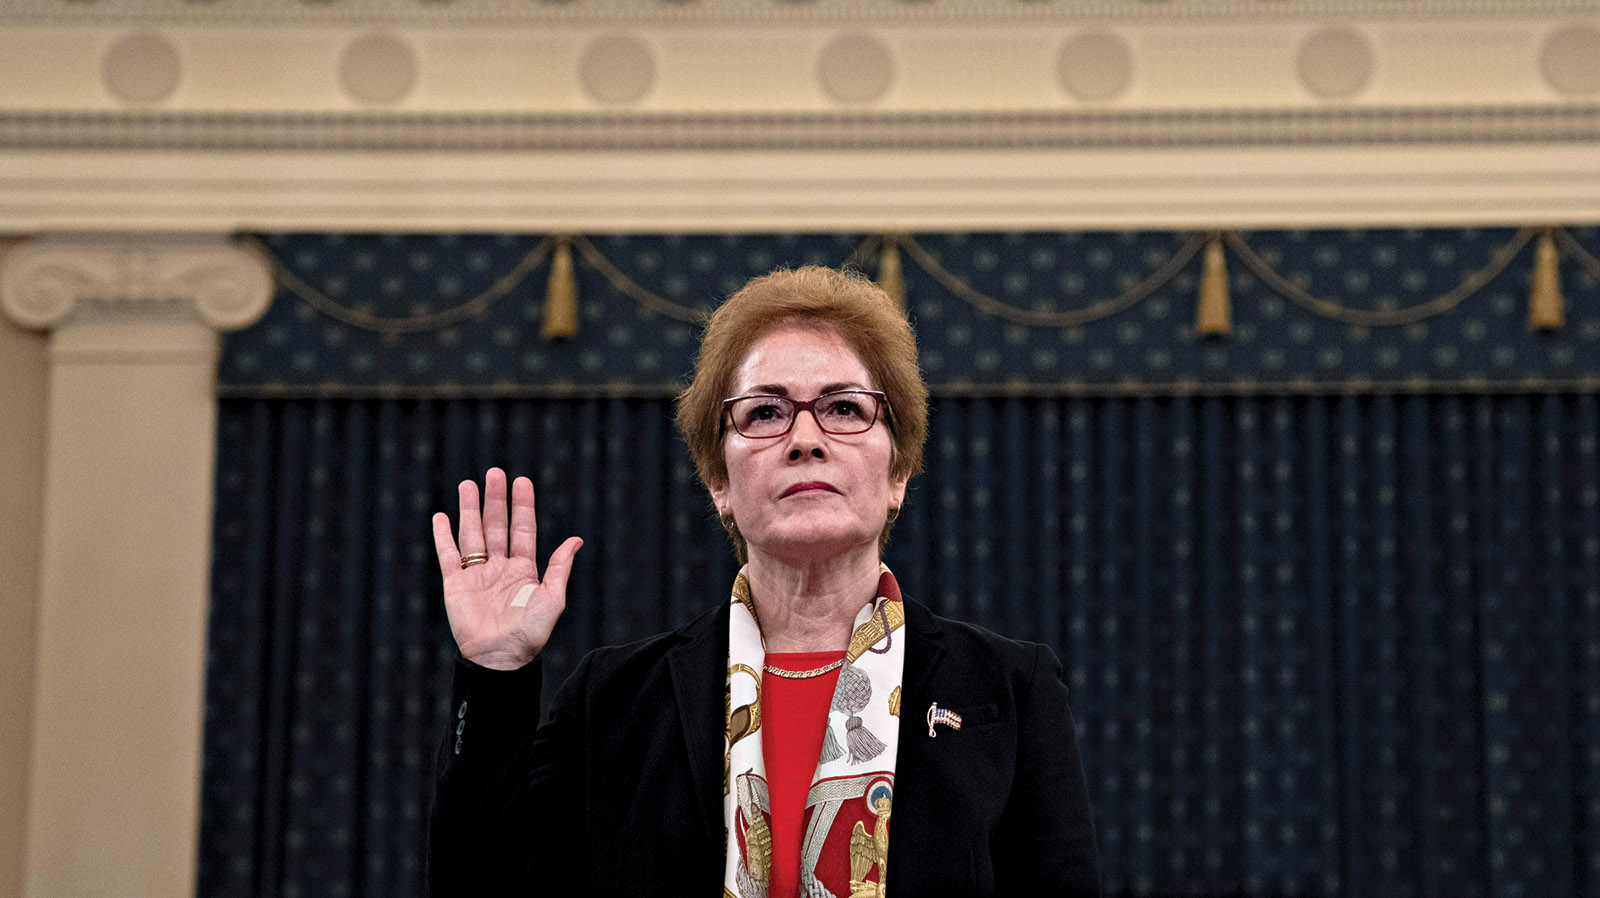 Former ambassador Marie Yovanovich being sworn in to testify during the House Intelligence Committee’s hearings on the impeachment of President Trump